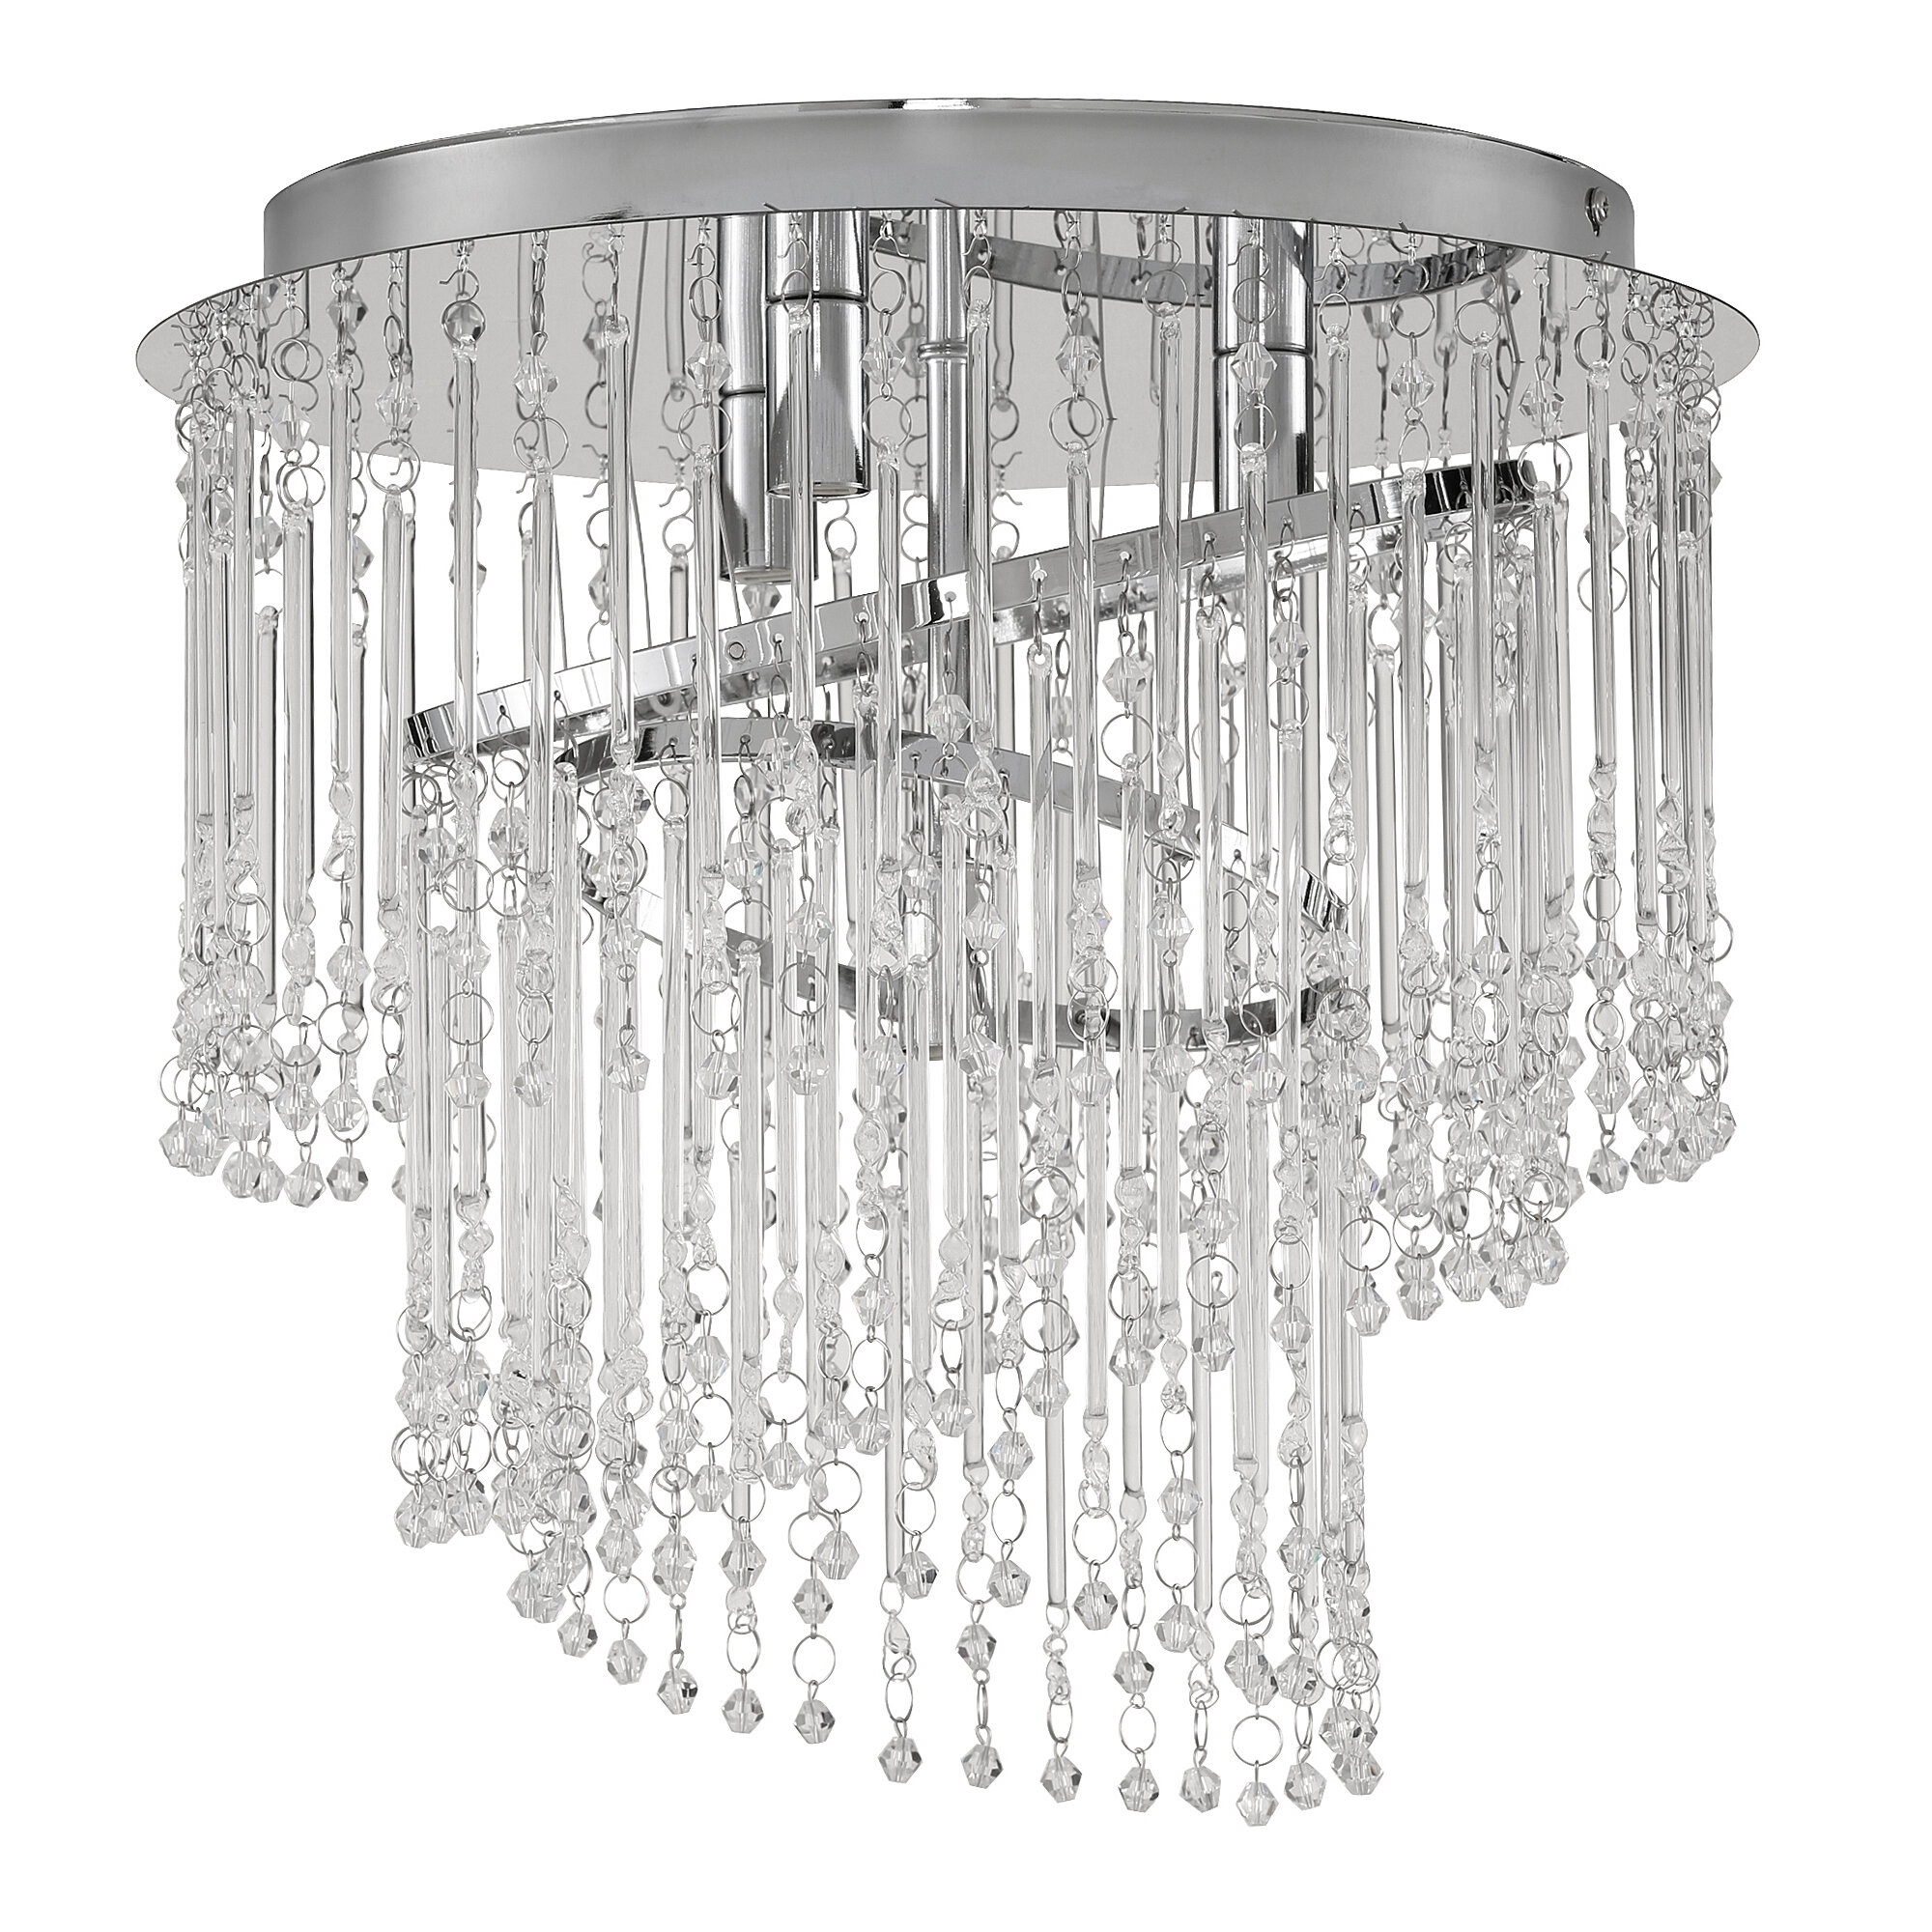 4 Light Flush Ceiling Light with Crystal Droplets